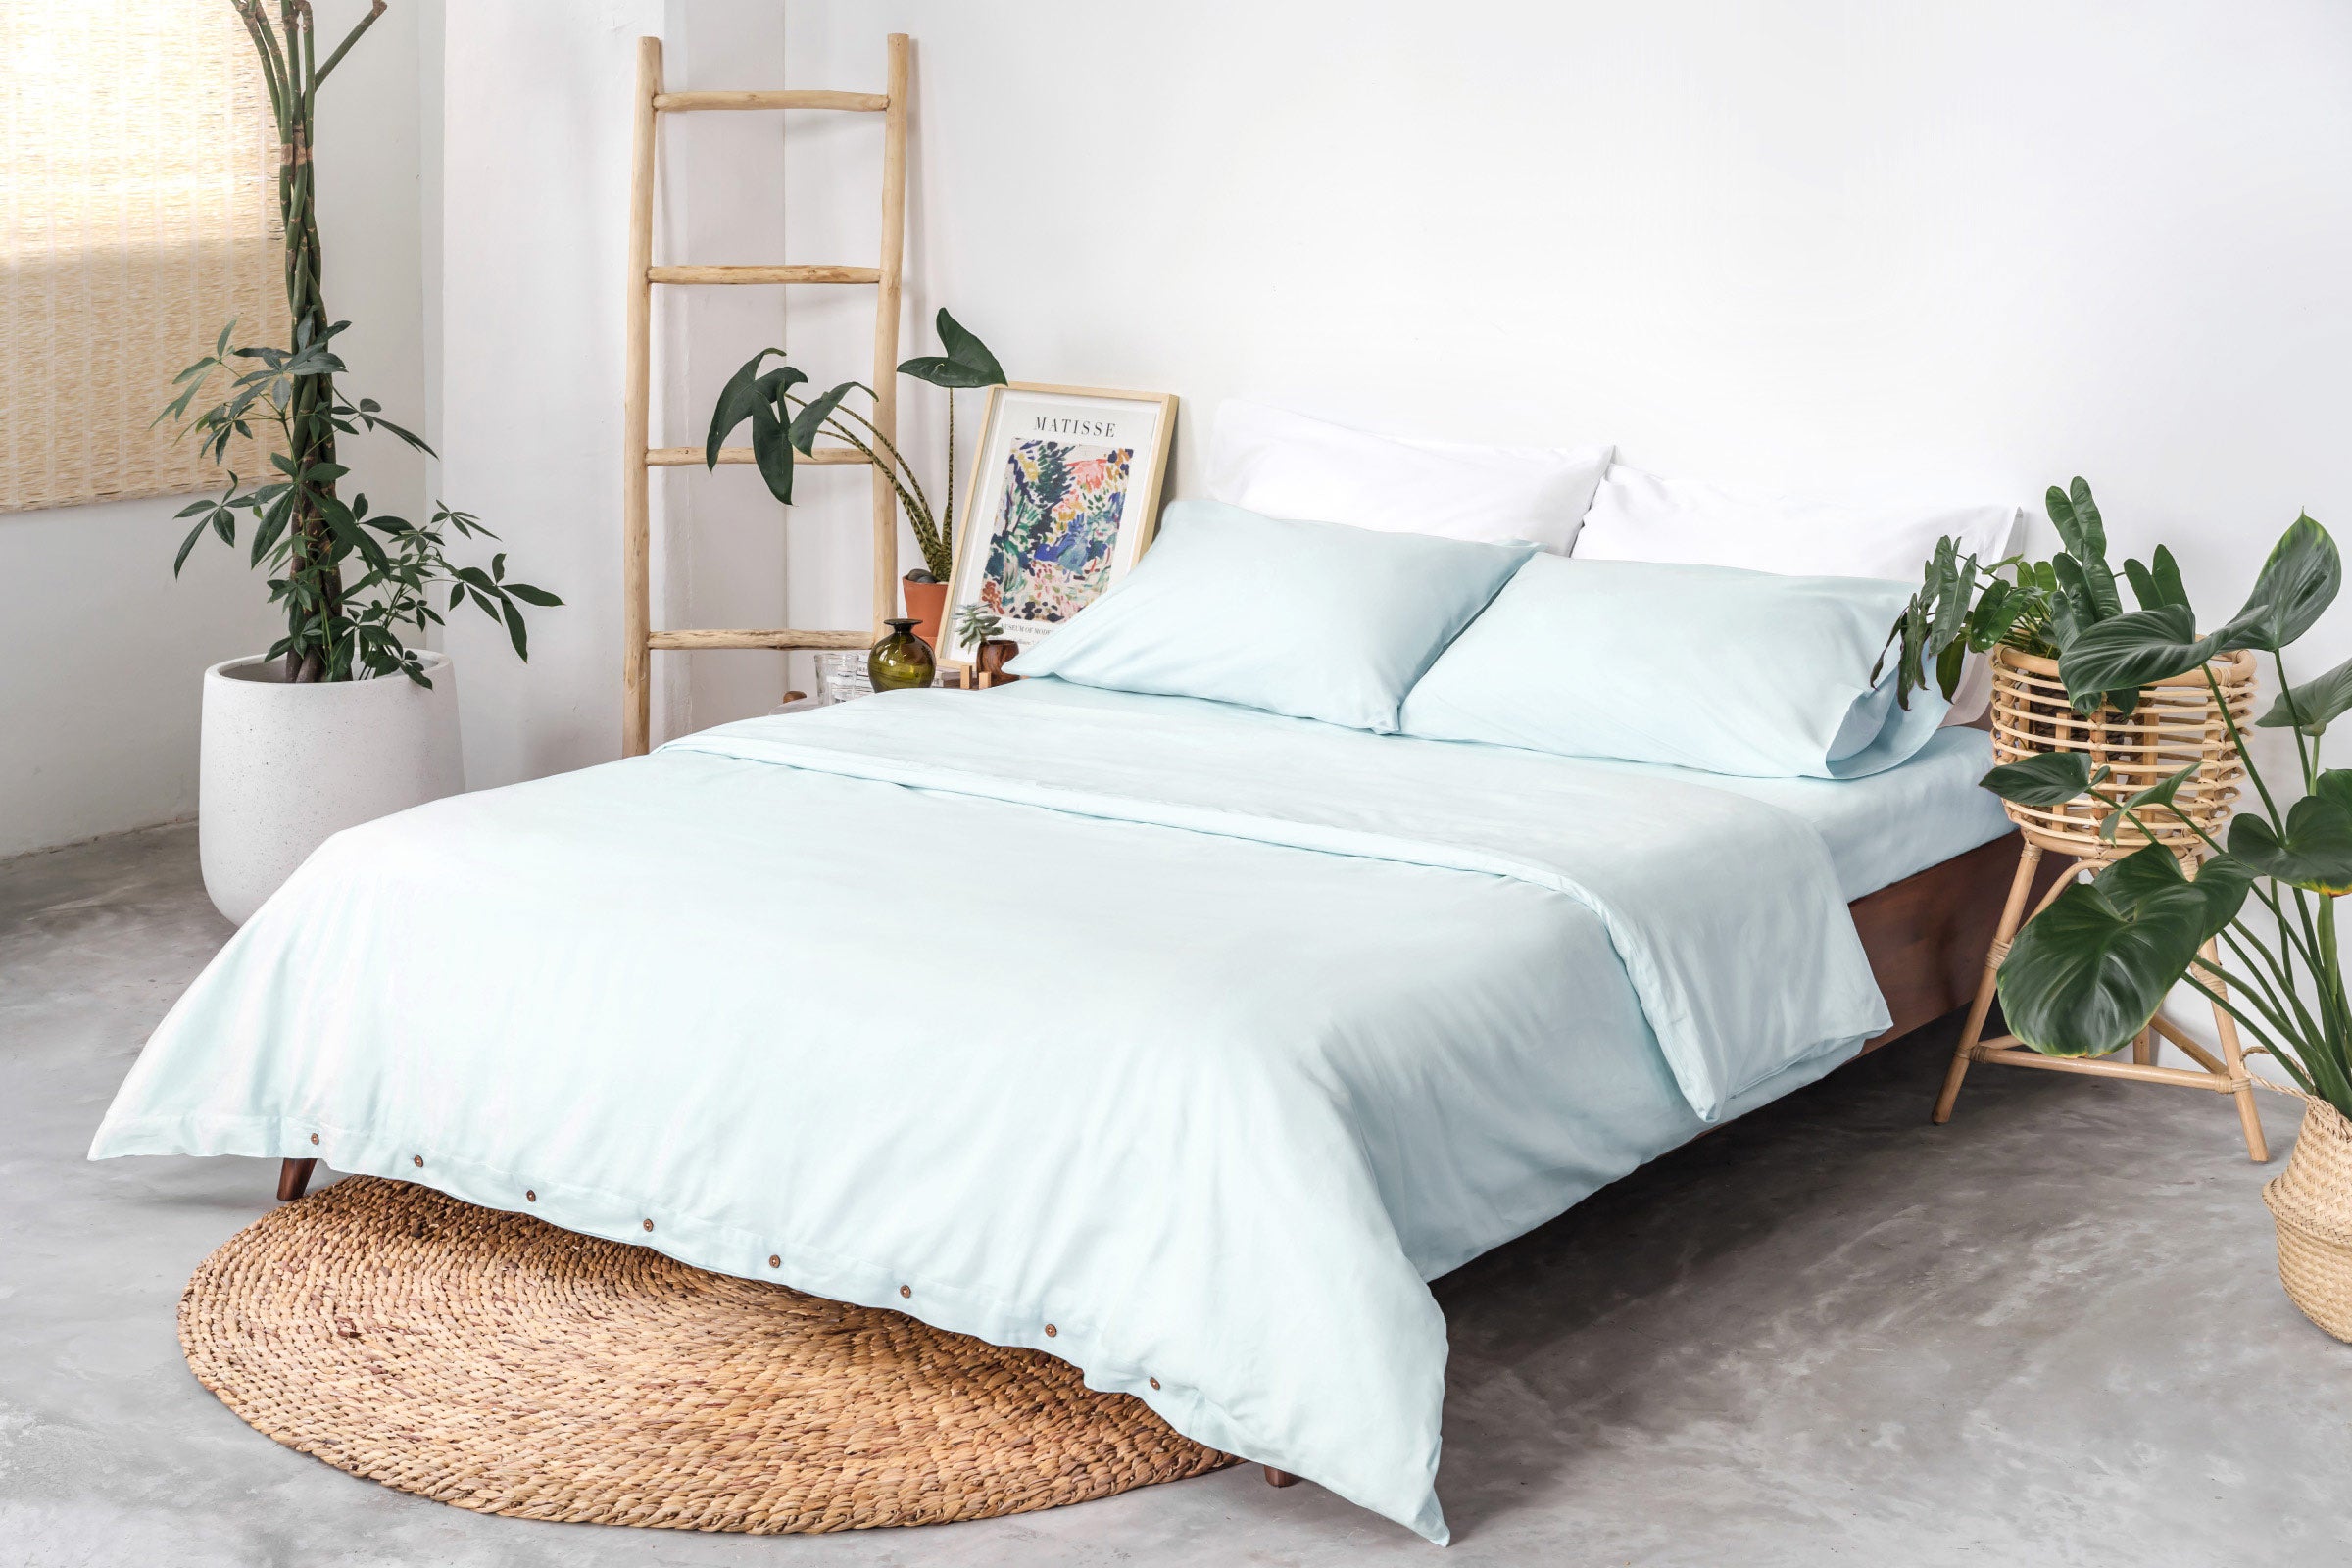 classic-mint-duvet-cover-fitted-sheet-pillowcase-pair-white-pillowcase-pair-side-view-by-sojao.jpg